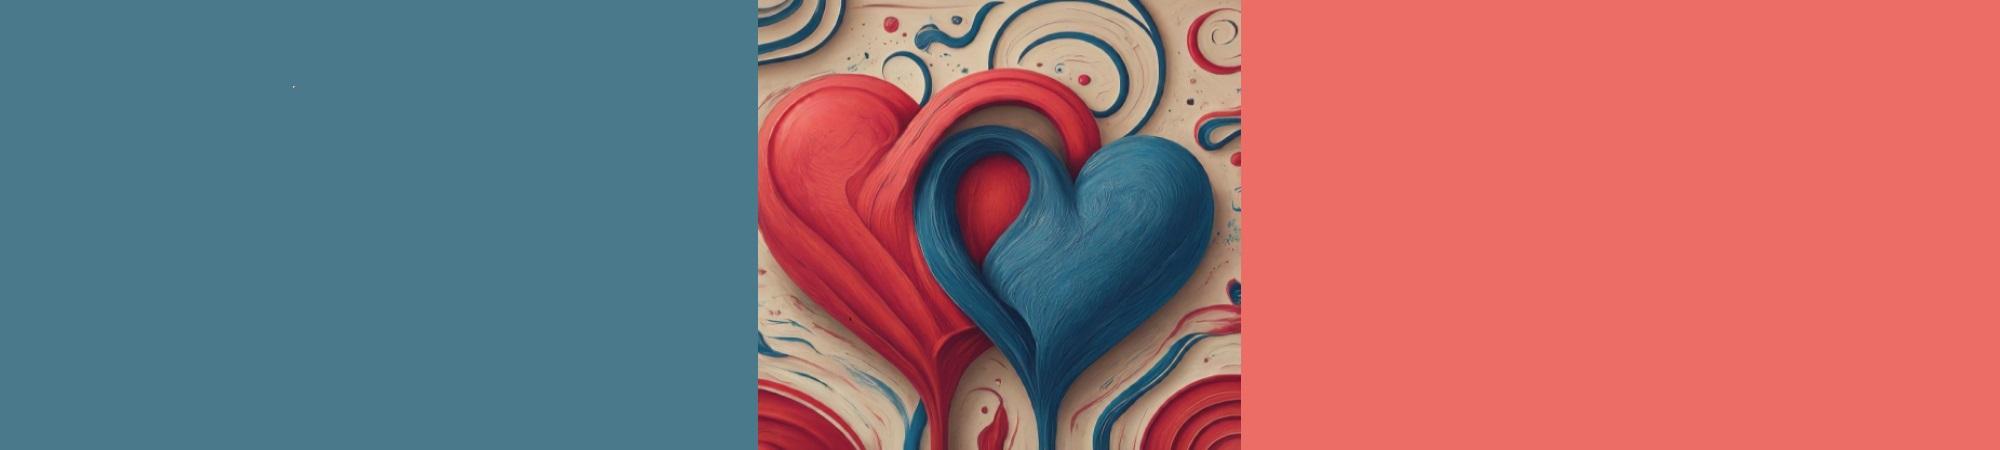 Sculpture of a red heart and a blue heart intertwined. 